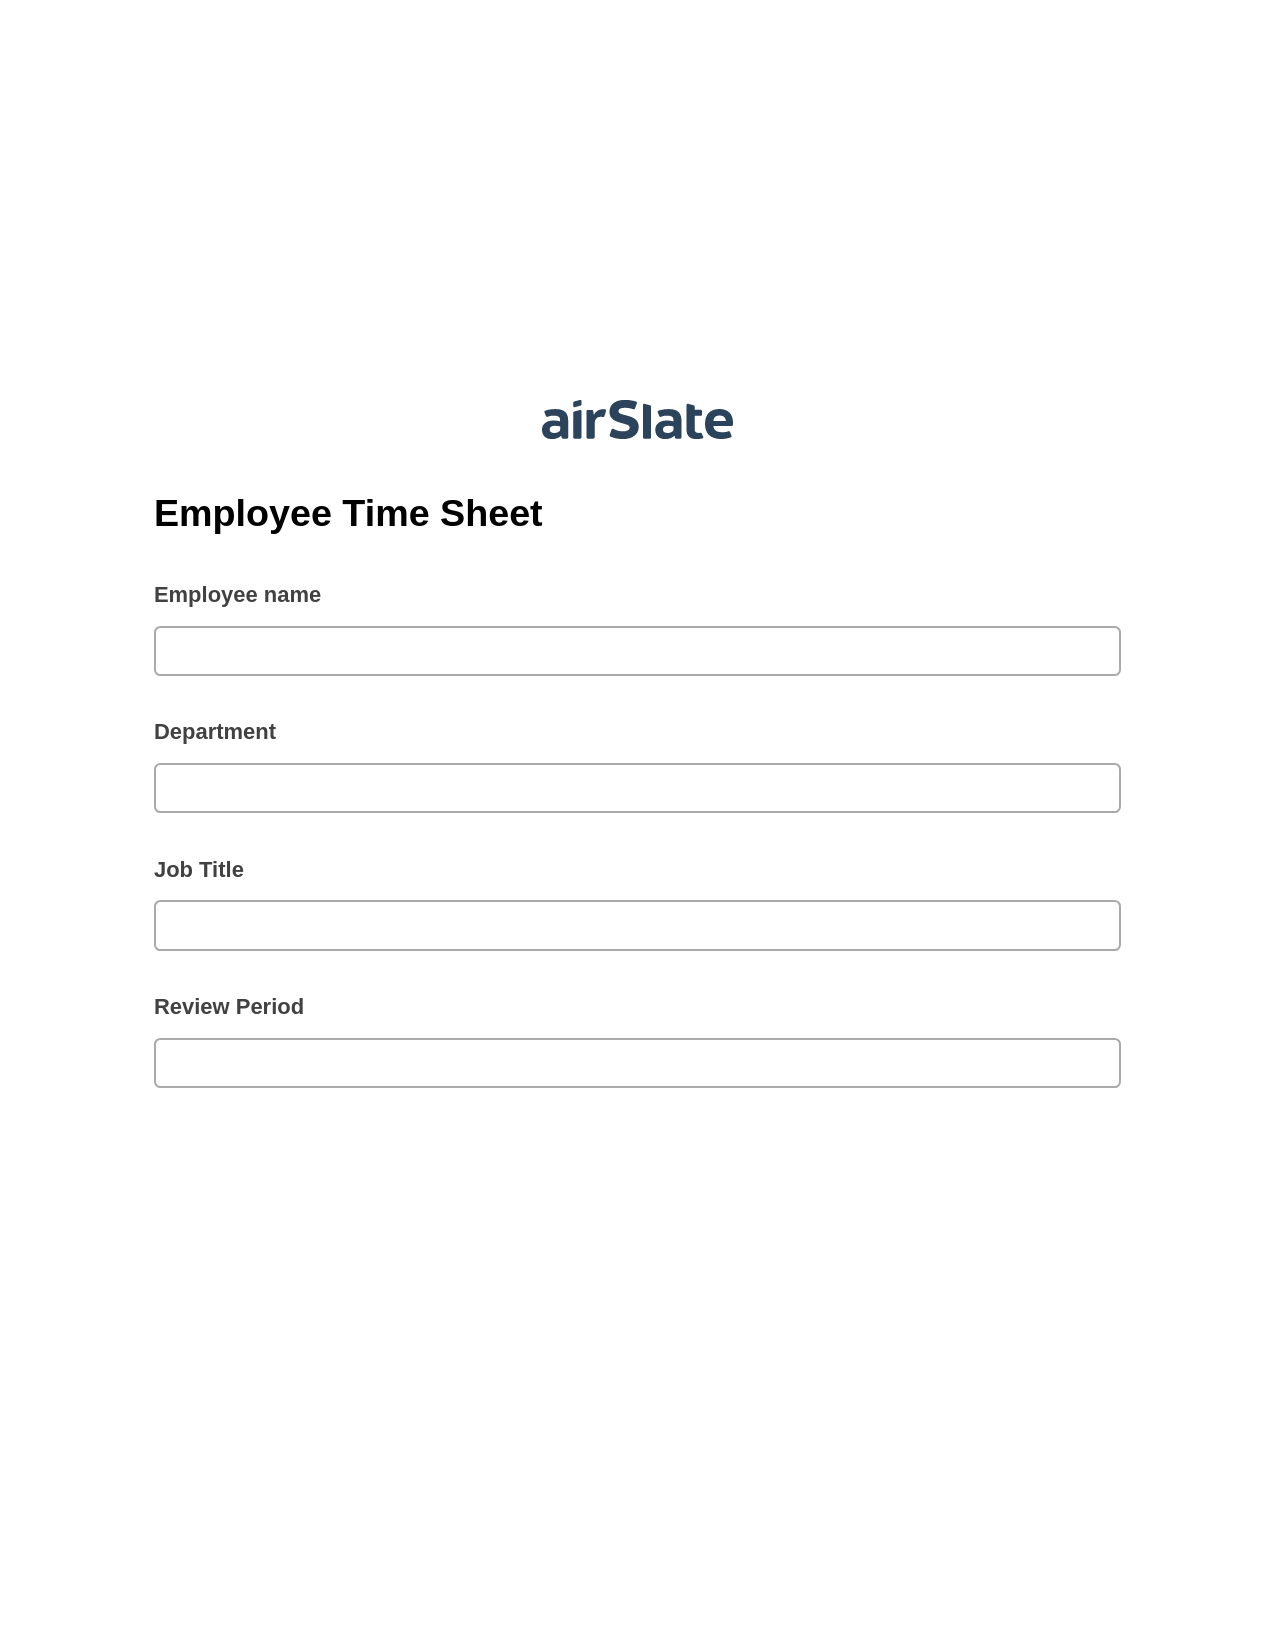 Multirole Employee Time Sheet Pre-fill Dropdowns from Airtable, Create slate addon, Export to Google Sheet Bot